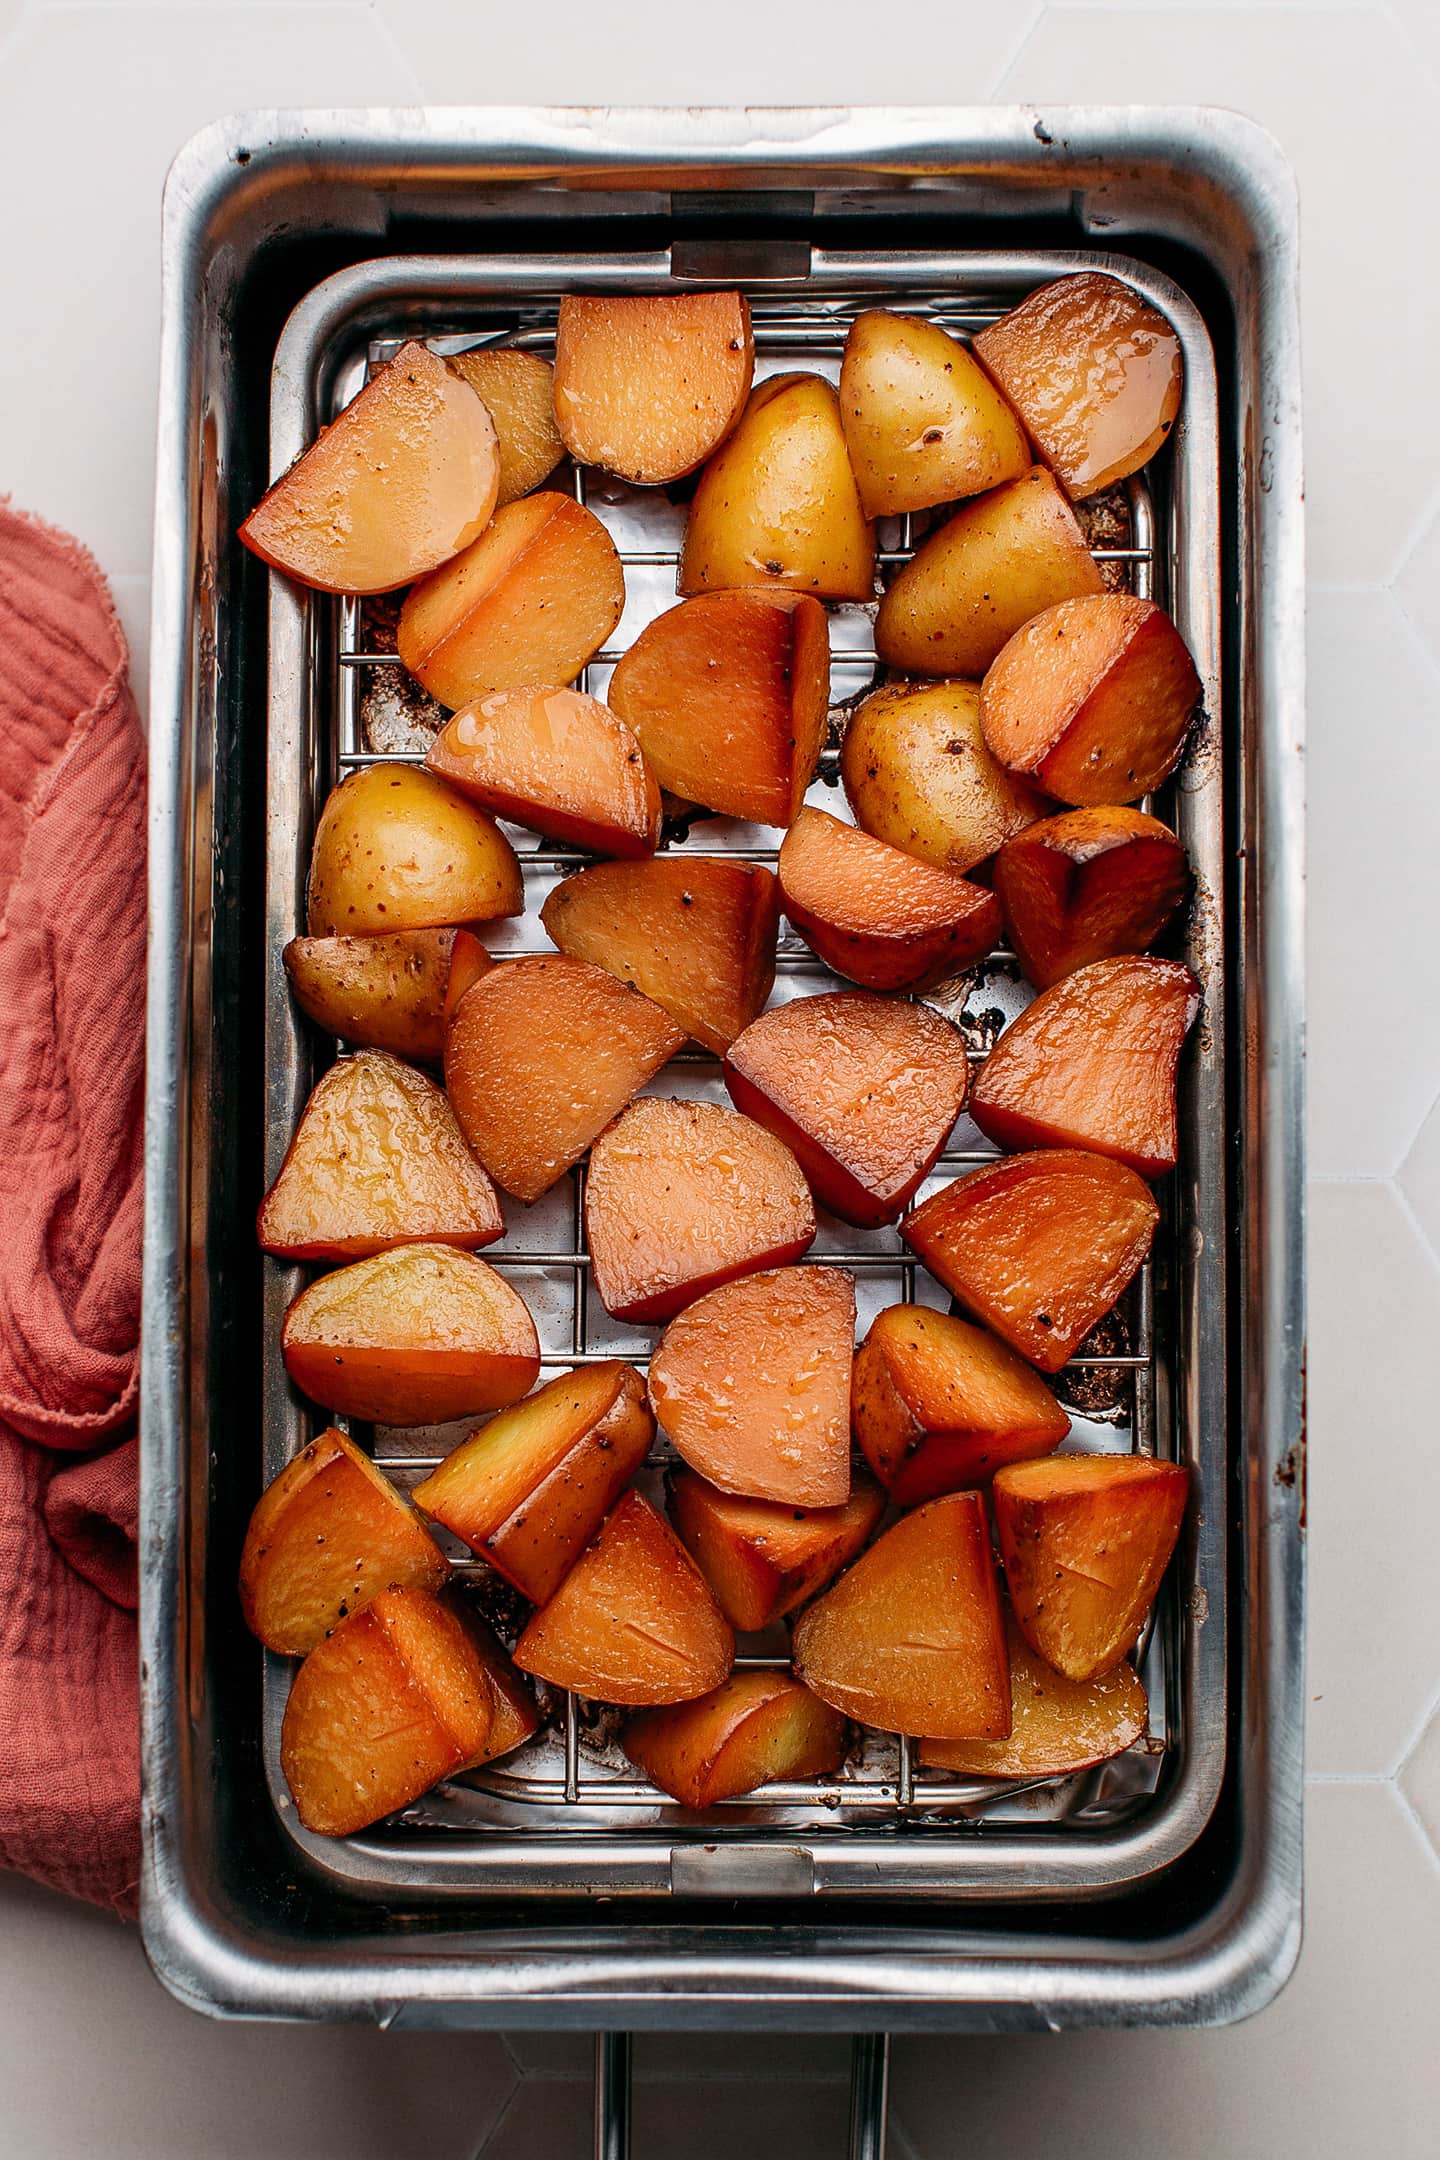 Quartered smoked potatoes in a stovetop smoker.